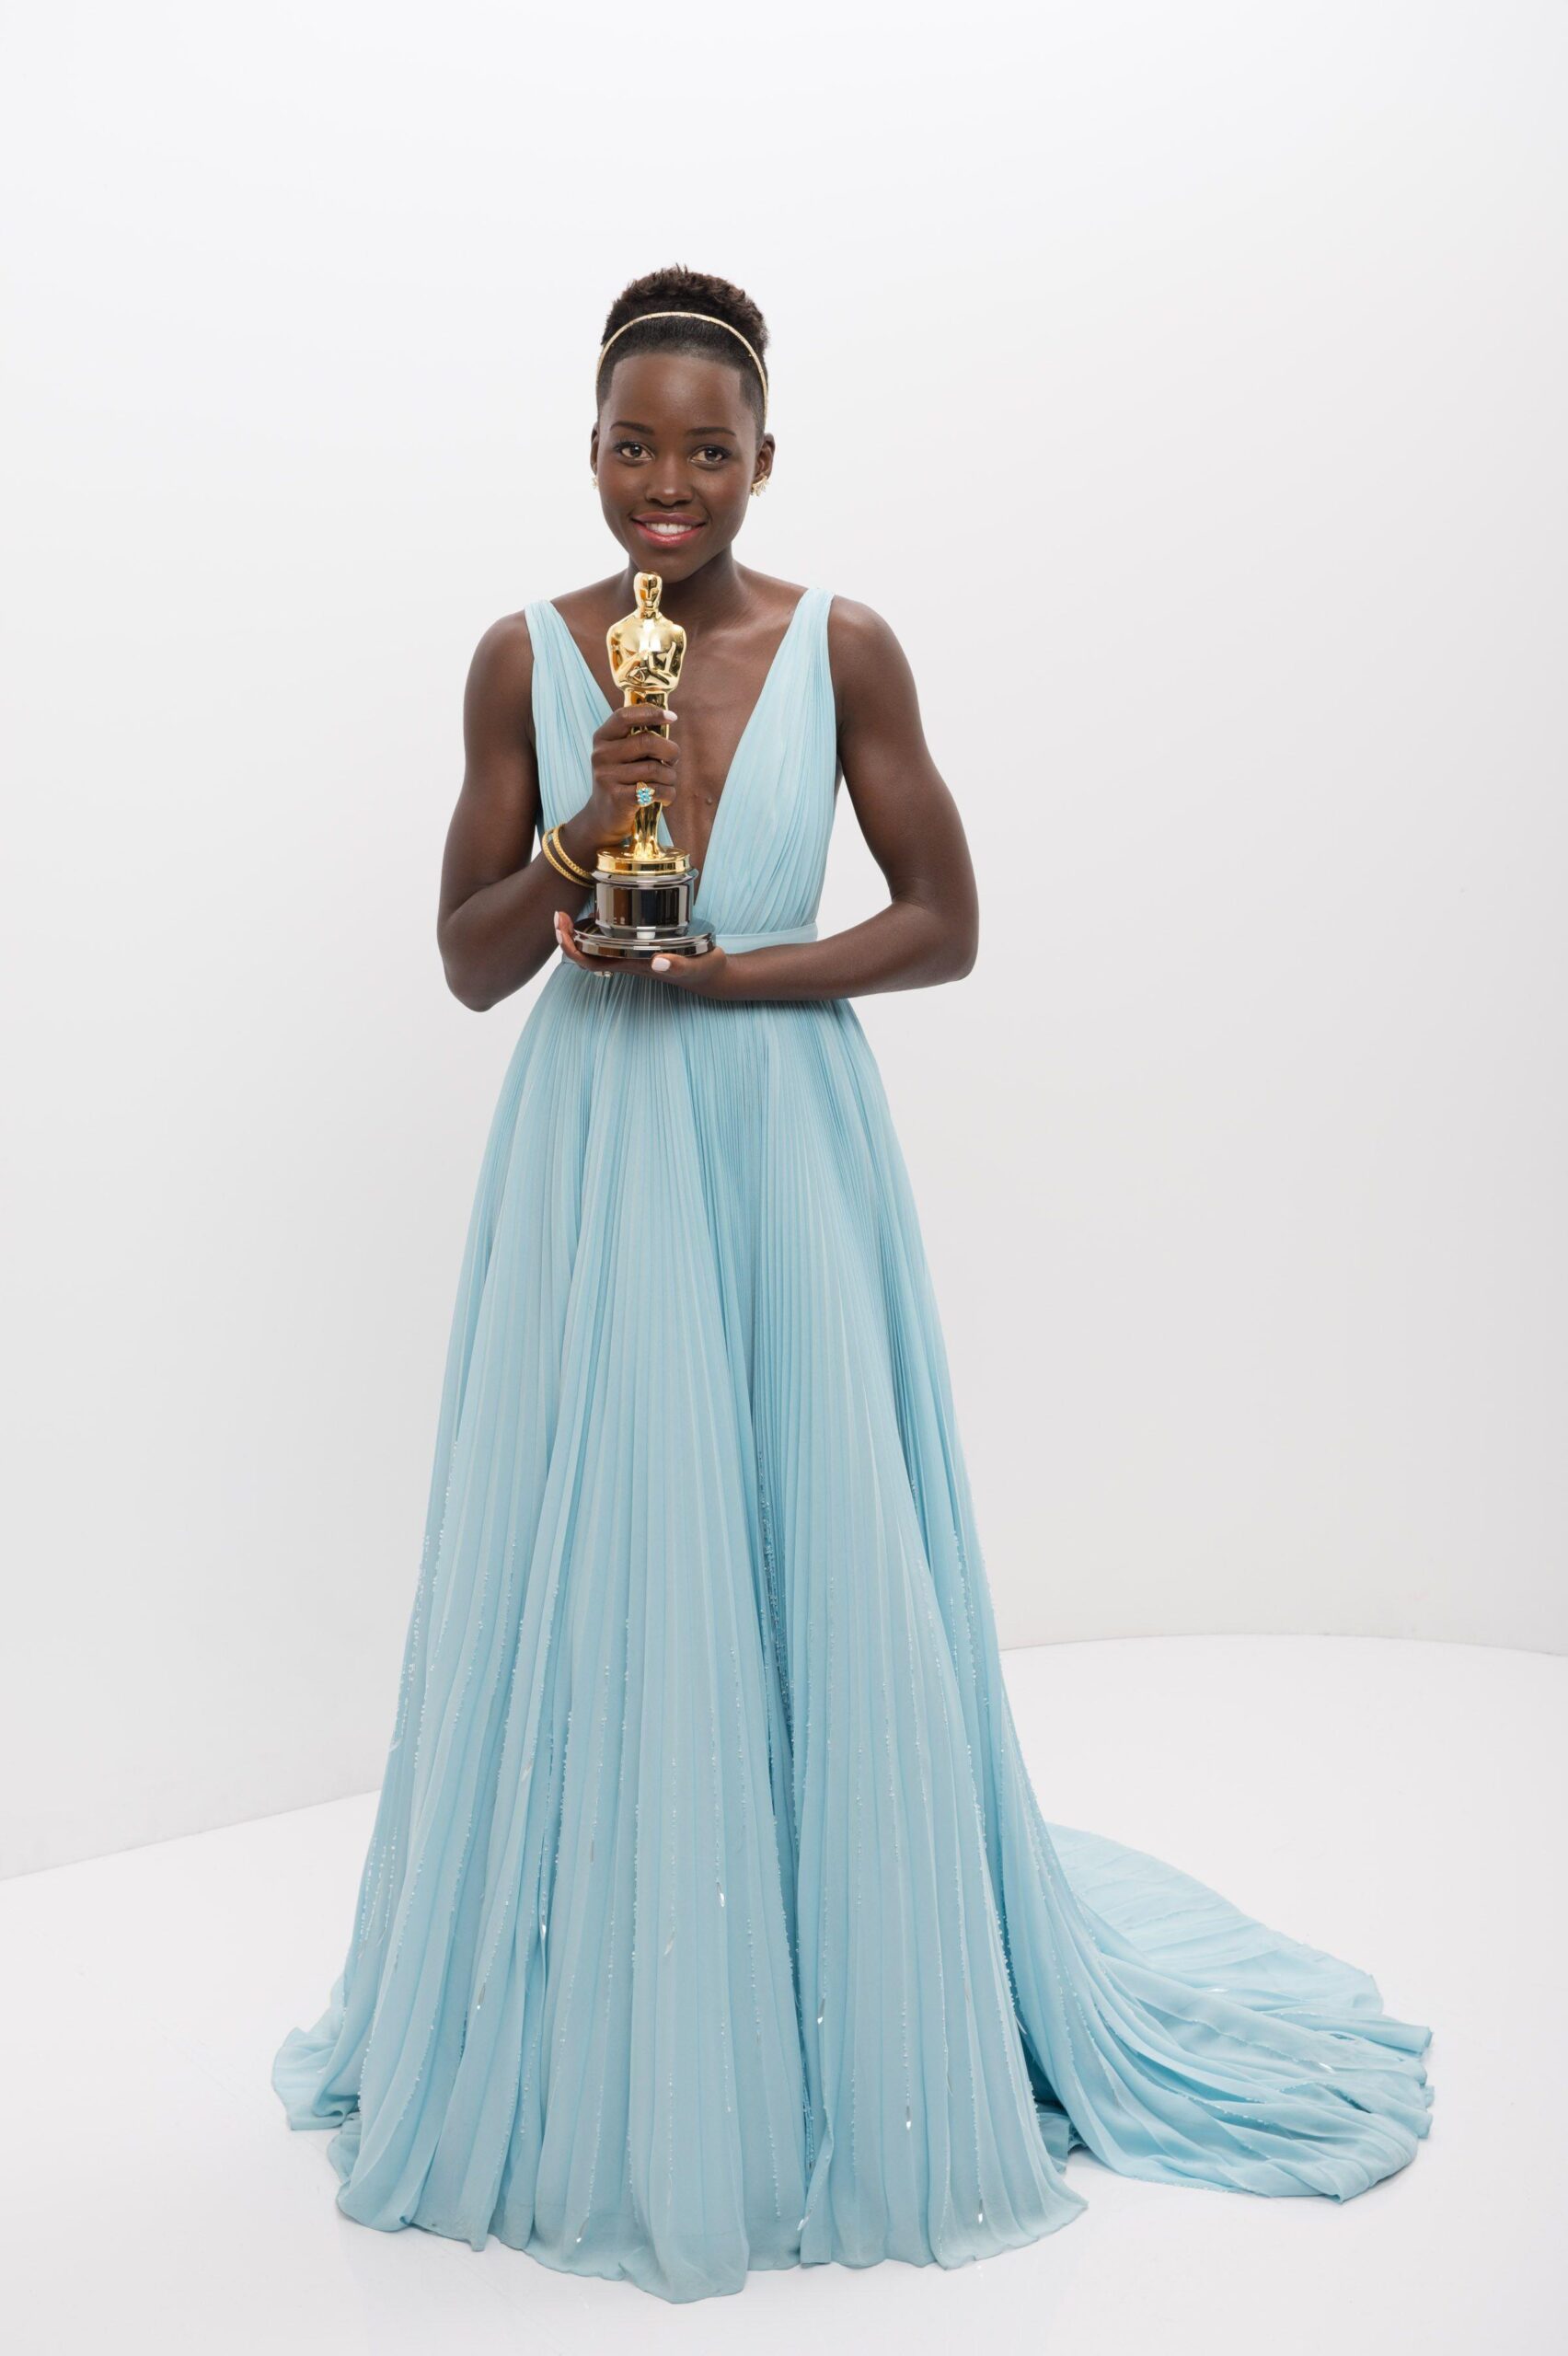 Lupita Nyong’o with her Oscar statuette [] : HumanPorn